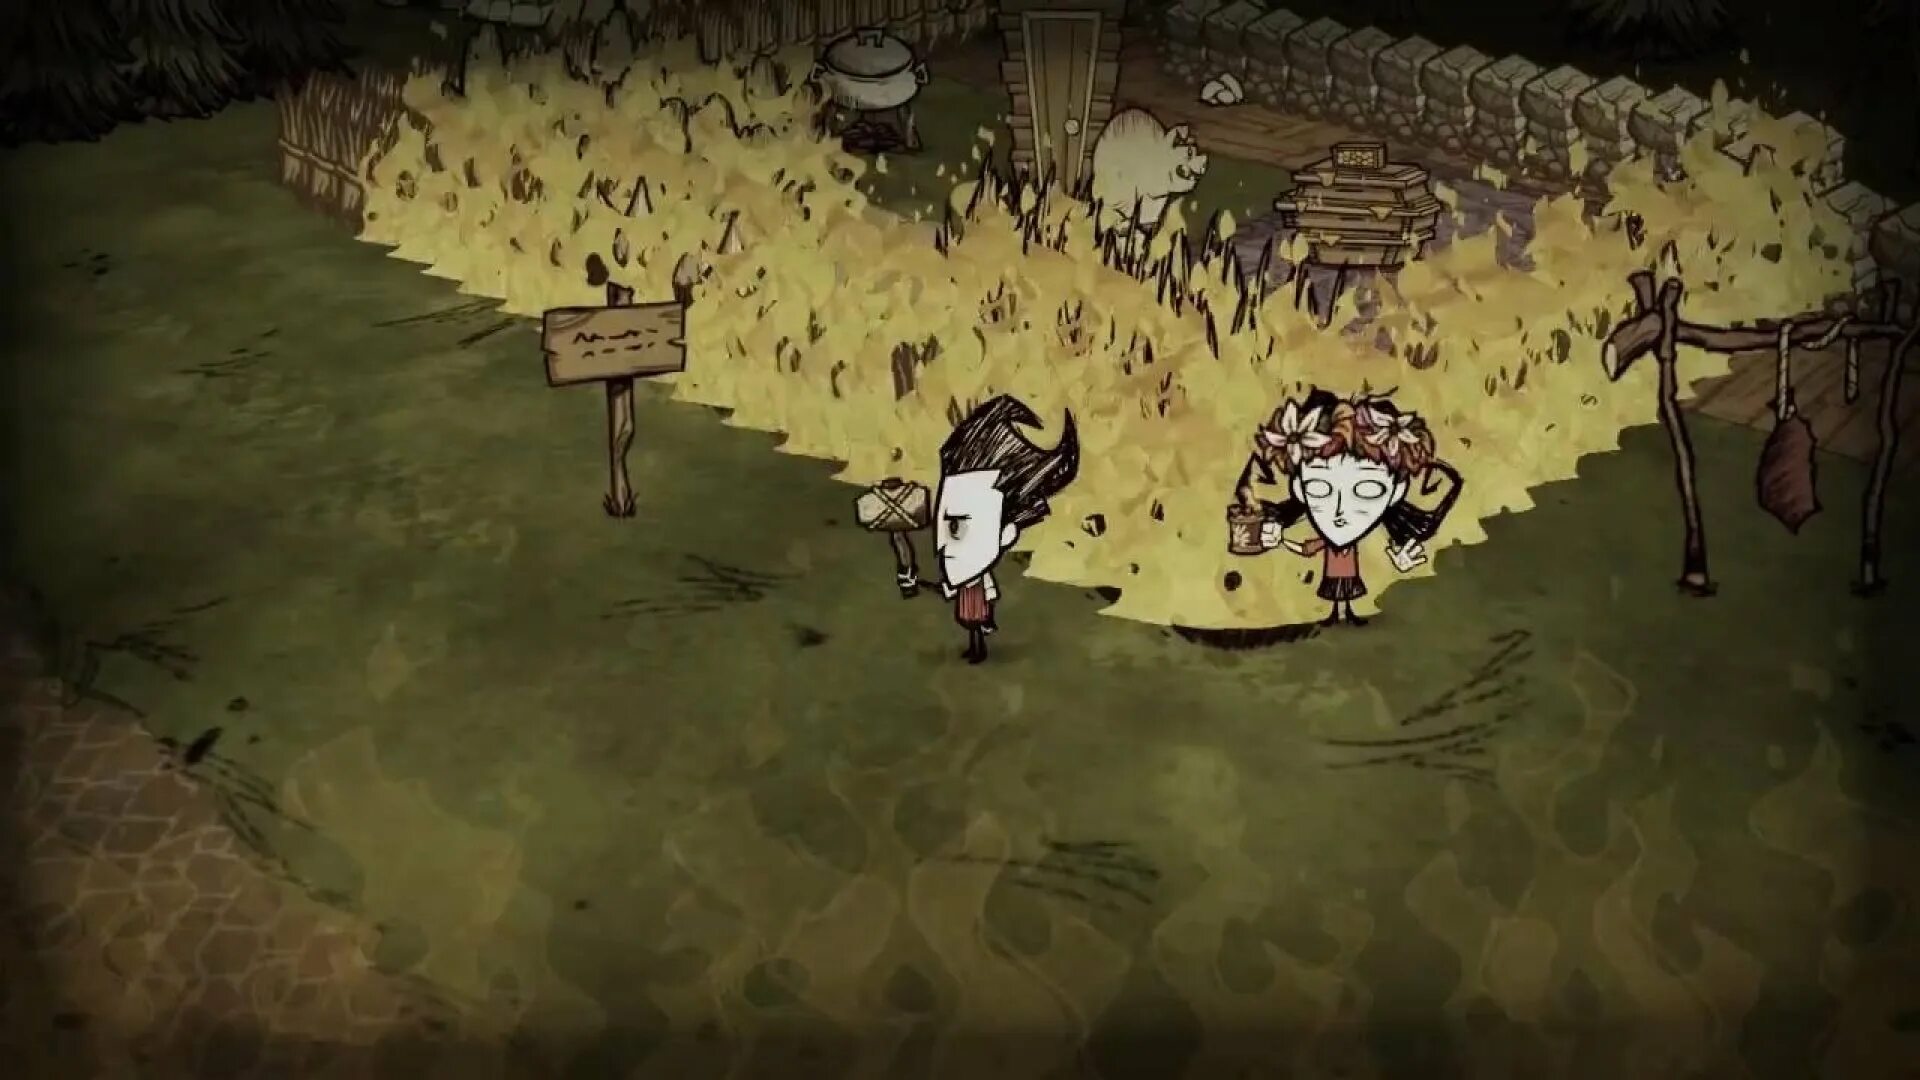 Don't Starve together. Don t Starve игра. Донт старв тугезер. Don't Starve джунгли. Dont que